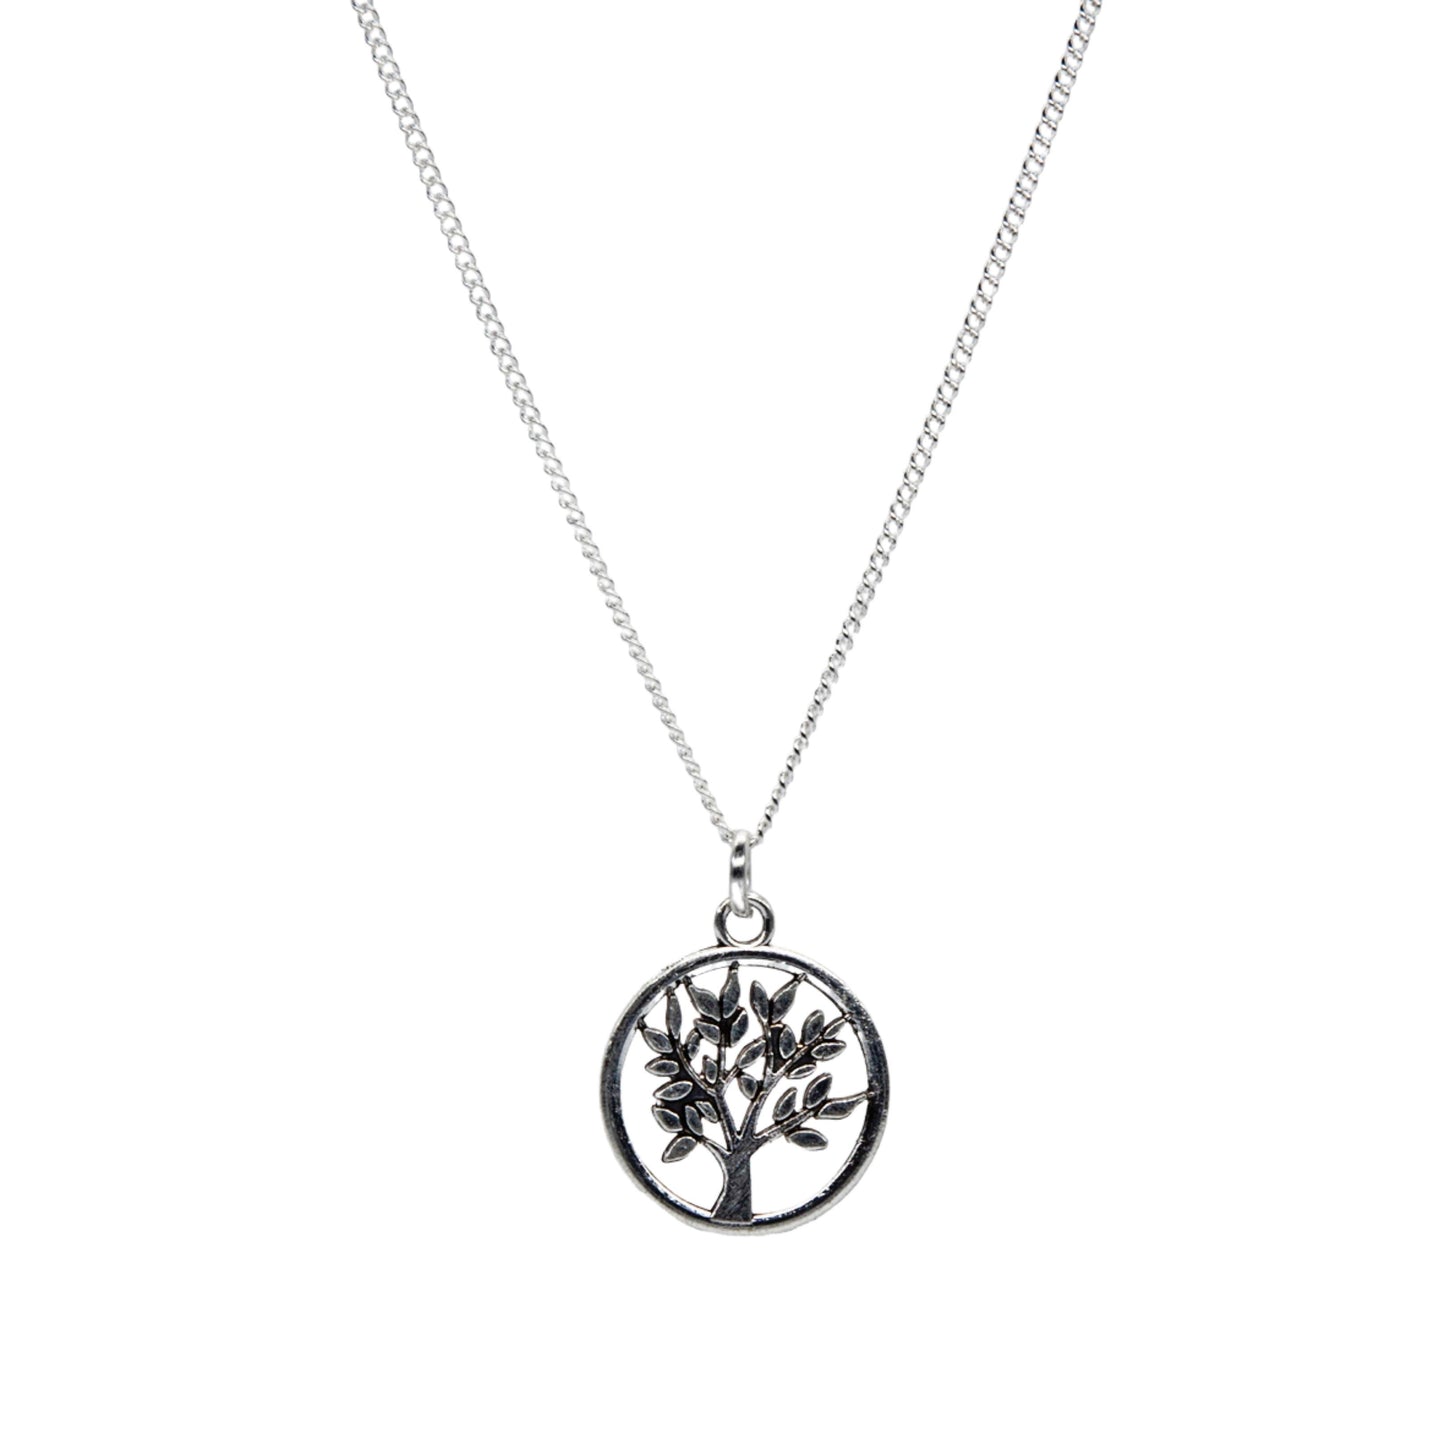 Silver Tree of life Encircle Necklace - Adjustable Length